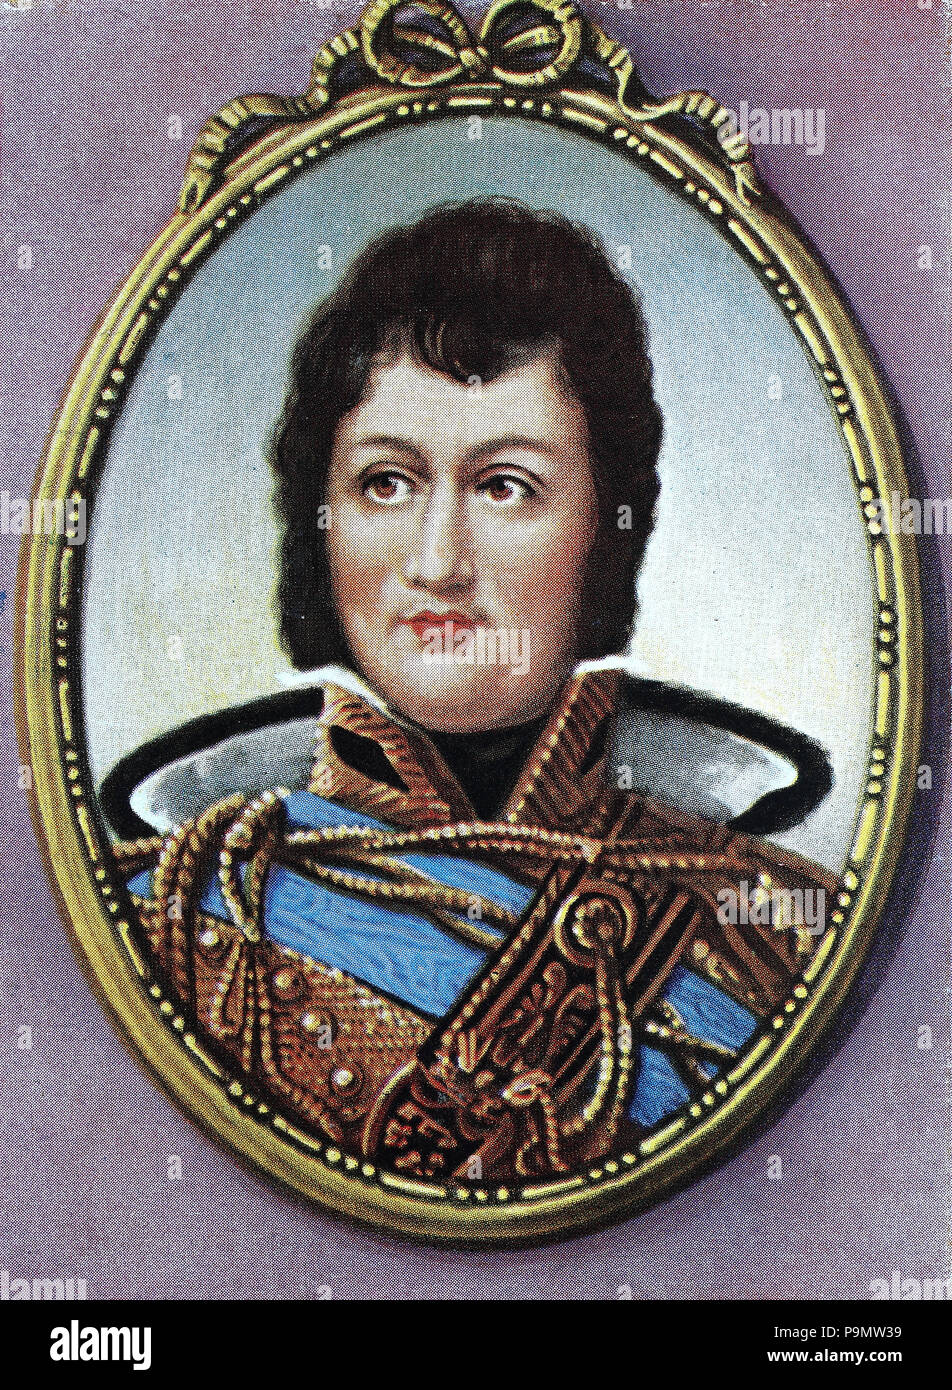 Louis Philippe I, 6 October 1773 â€“ 26 August 1850, was King of the French from 1830 to 1848 as the leader of the OrlÃ©anist party, digital improved reproduction of an original print from the year 1900 Stock Photo